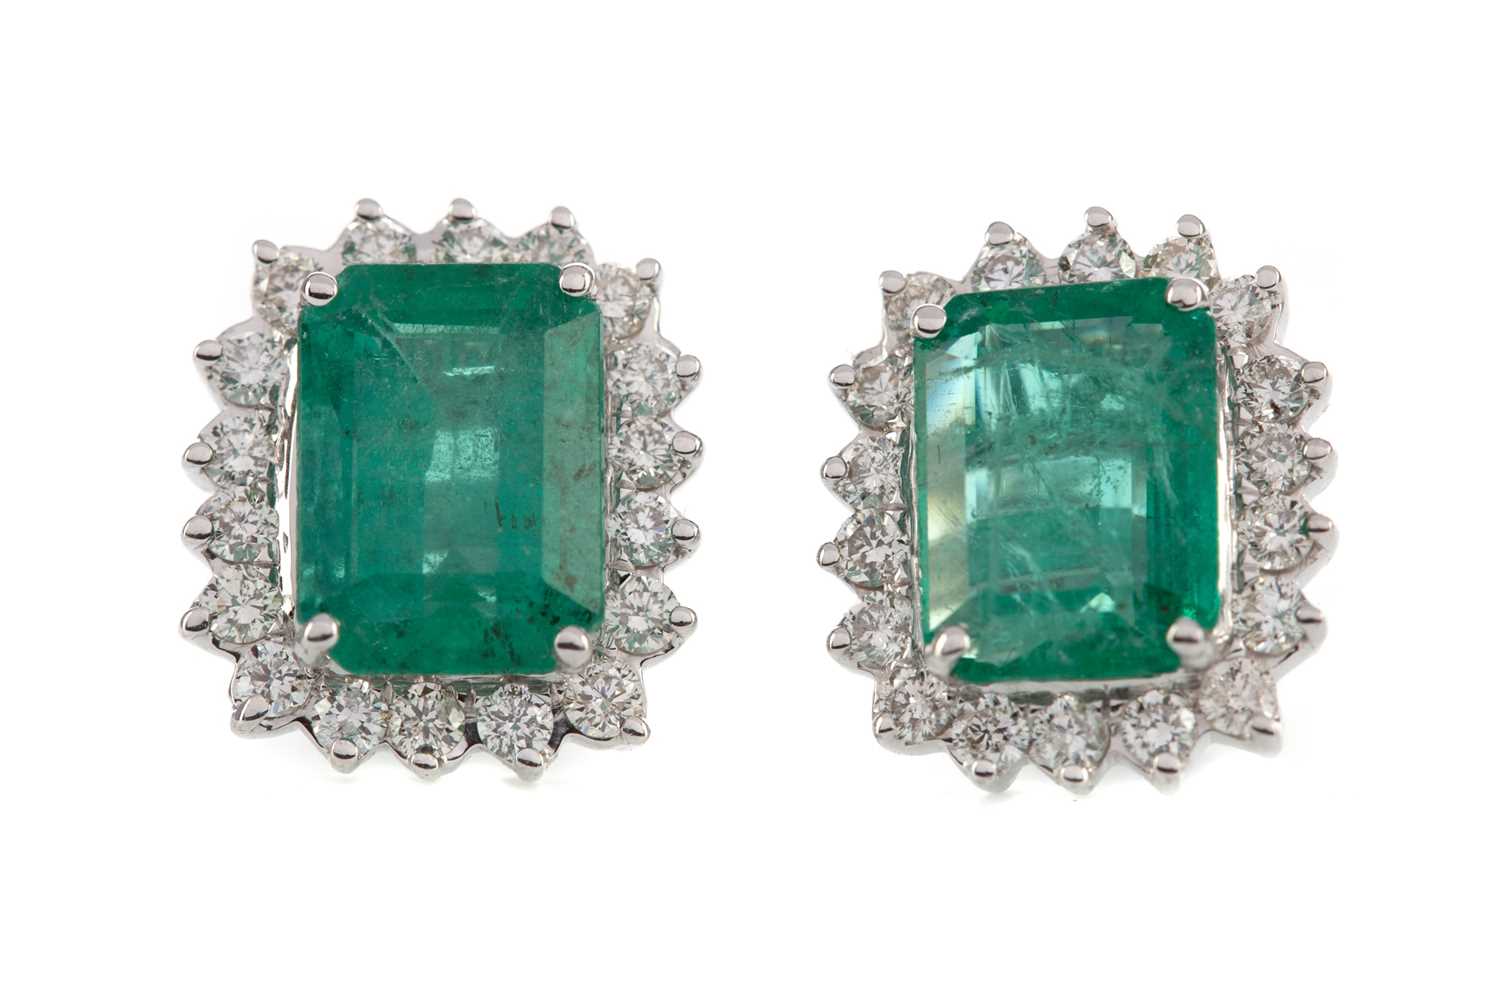 Lot 354 - A PAIR OF EMERALD AND DIAMOND EARRINGS